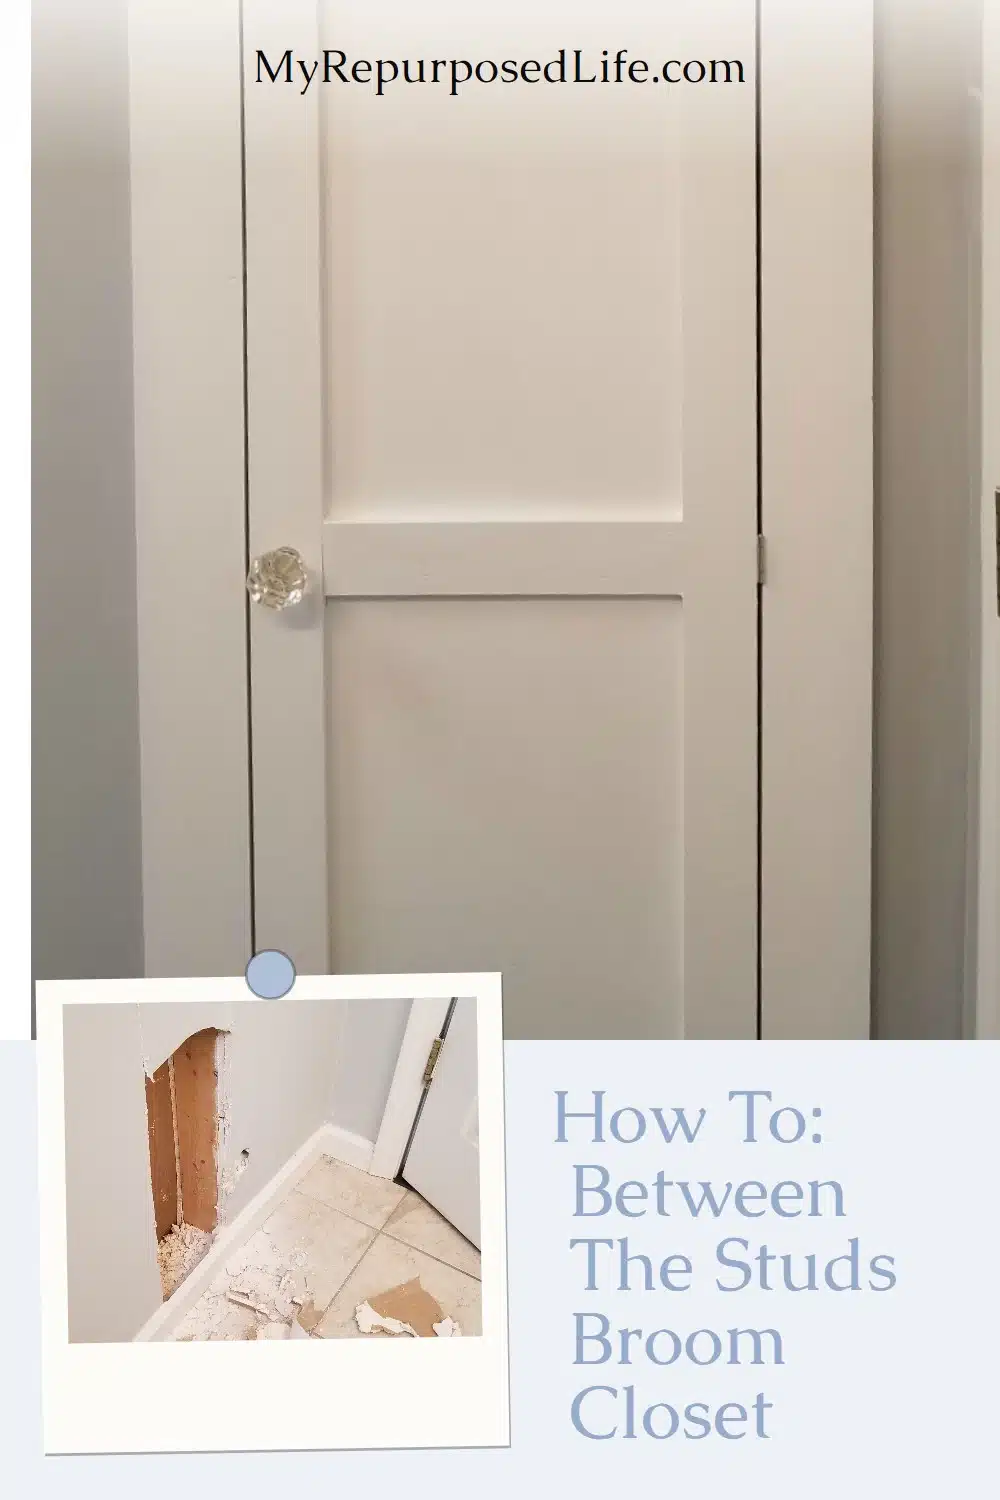 Building a closet between the studs is a great option for the kitchen or bathroom.This diy storage closet is perfect for storing tall items. #MyRepurposedLife #diy #closet #organization via @repurposedlife